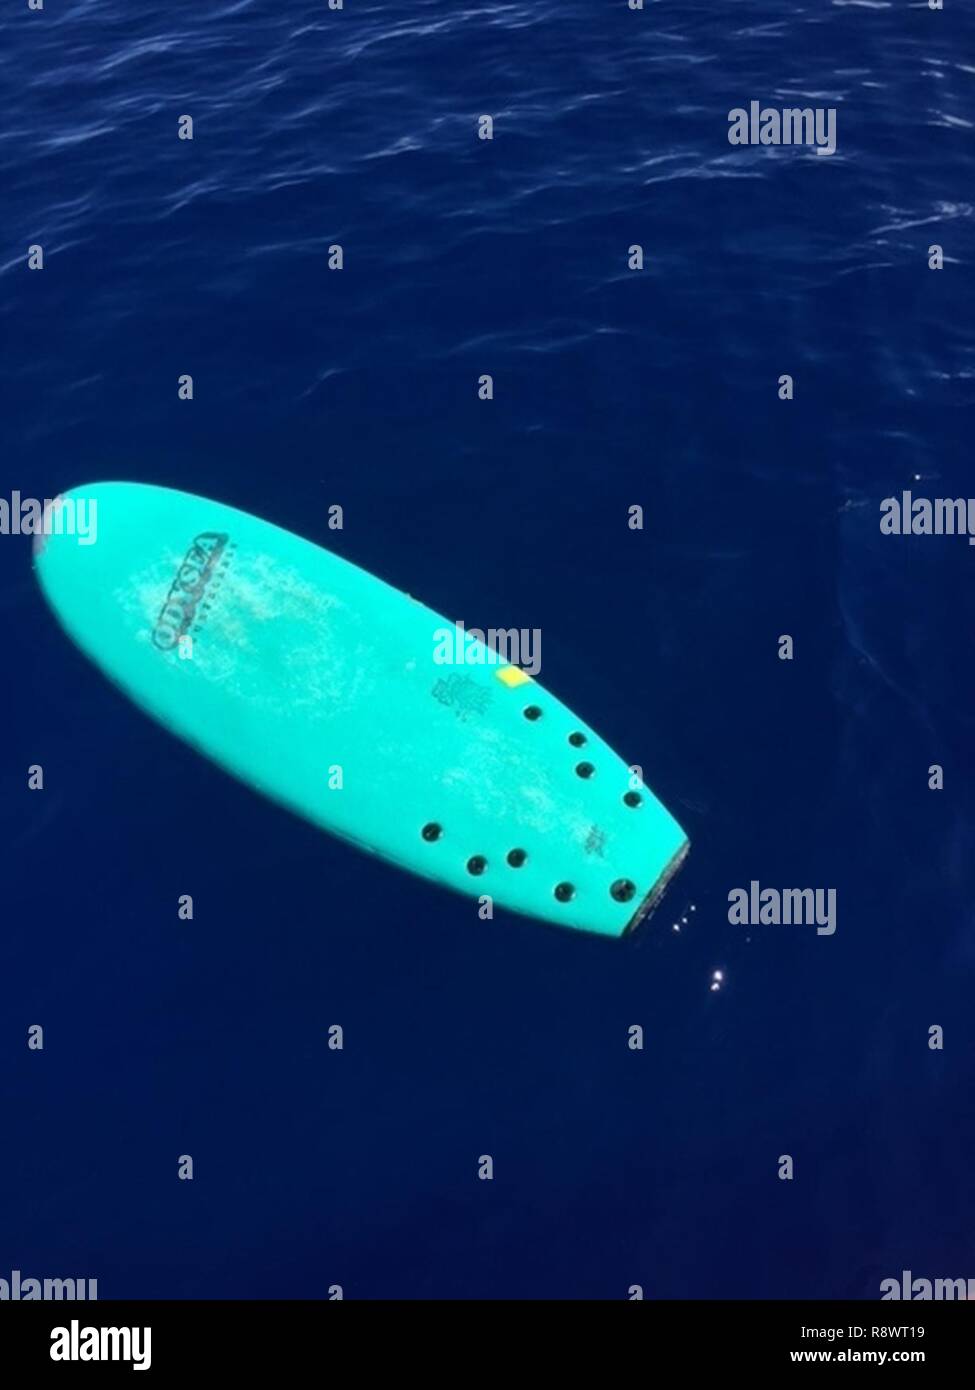 The Coast Guard is seeking the public’s help identifying the owner of an adrift, ODYSEA surfboard found approximately 2 miles off of Waikiki, Oahu, Thursday, Mar 16, 2017. Stock Photo